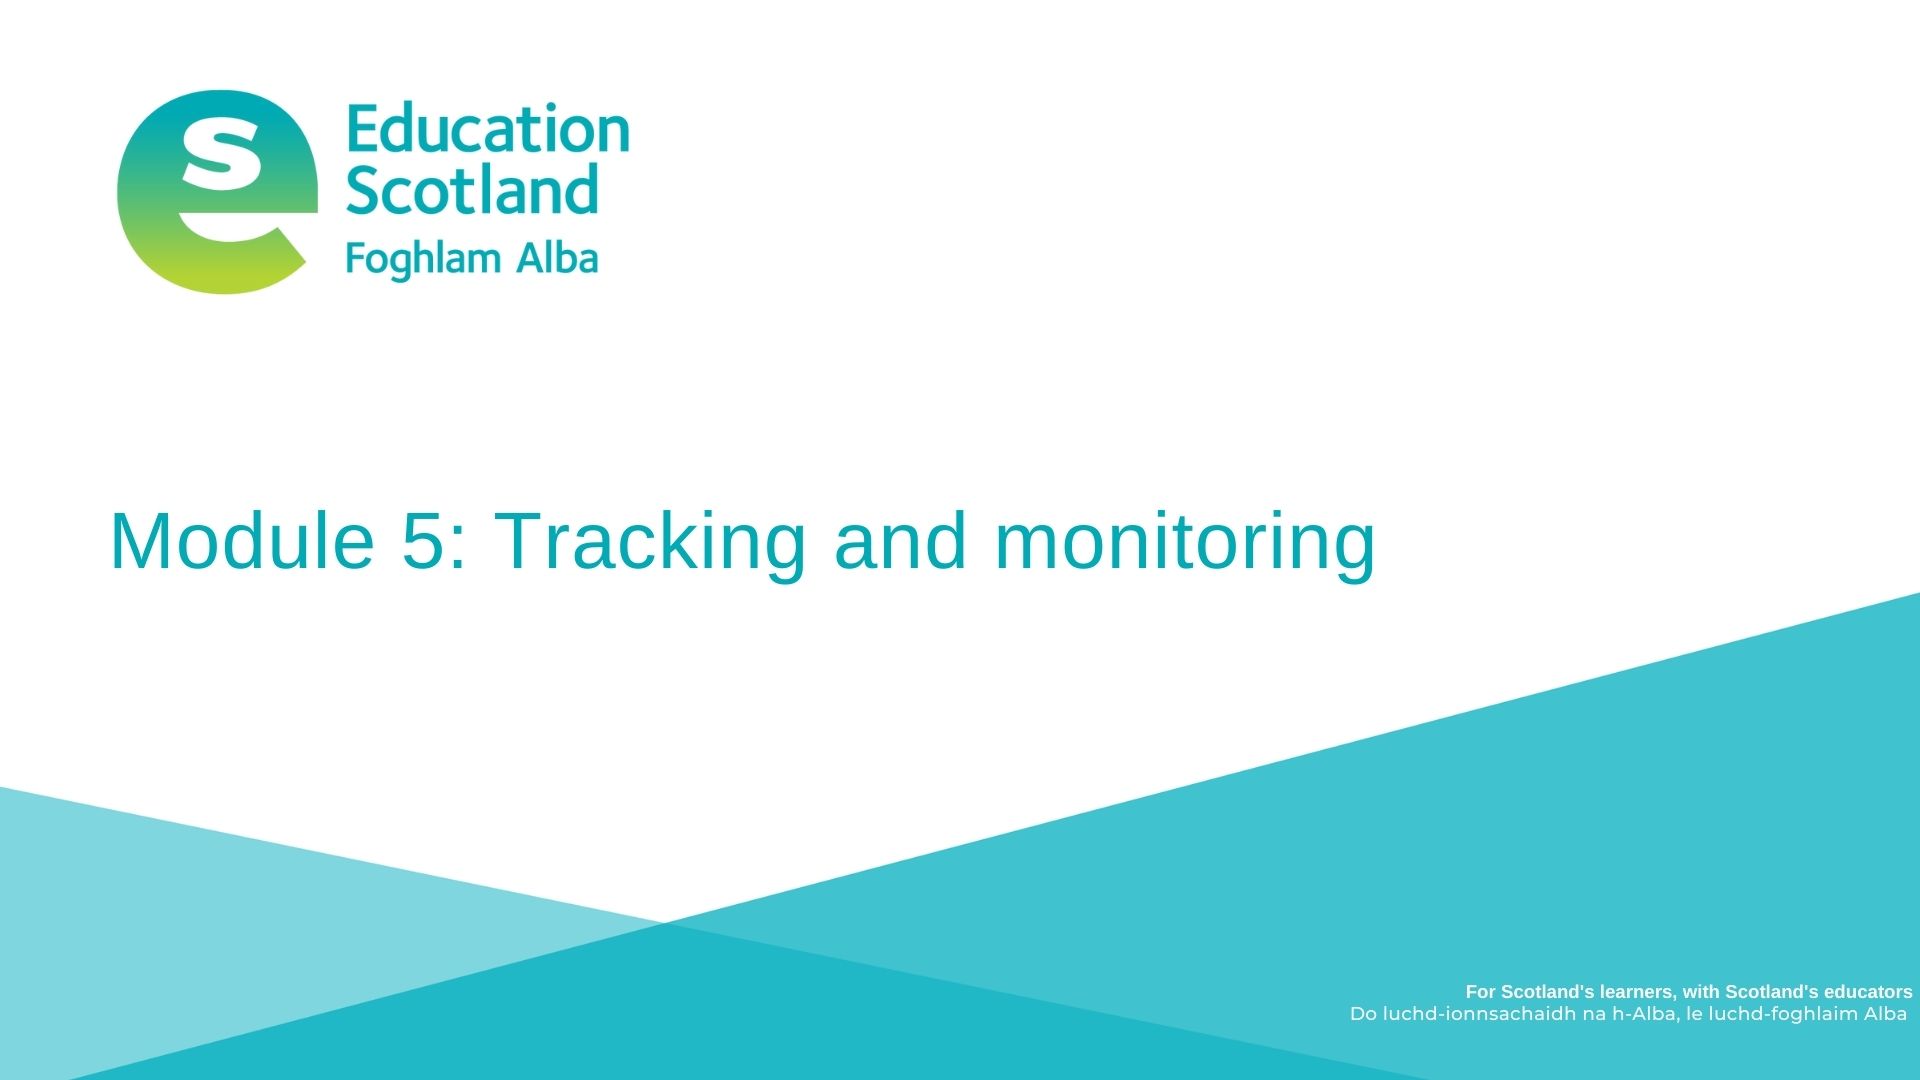 Module 5 – Tracking and monitoring